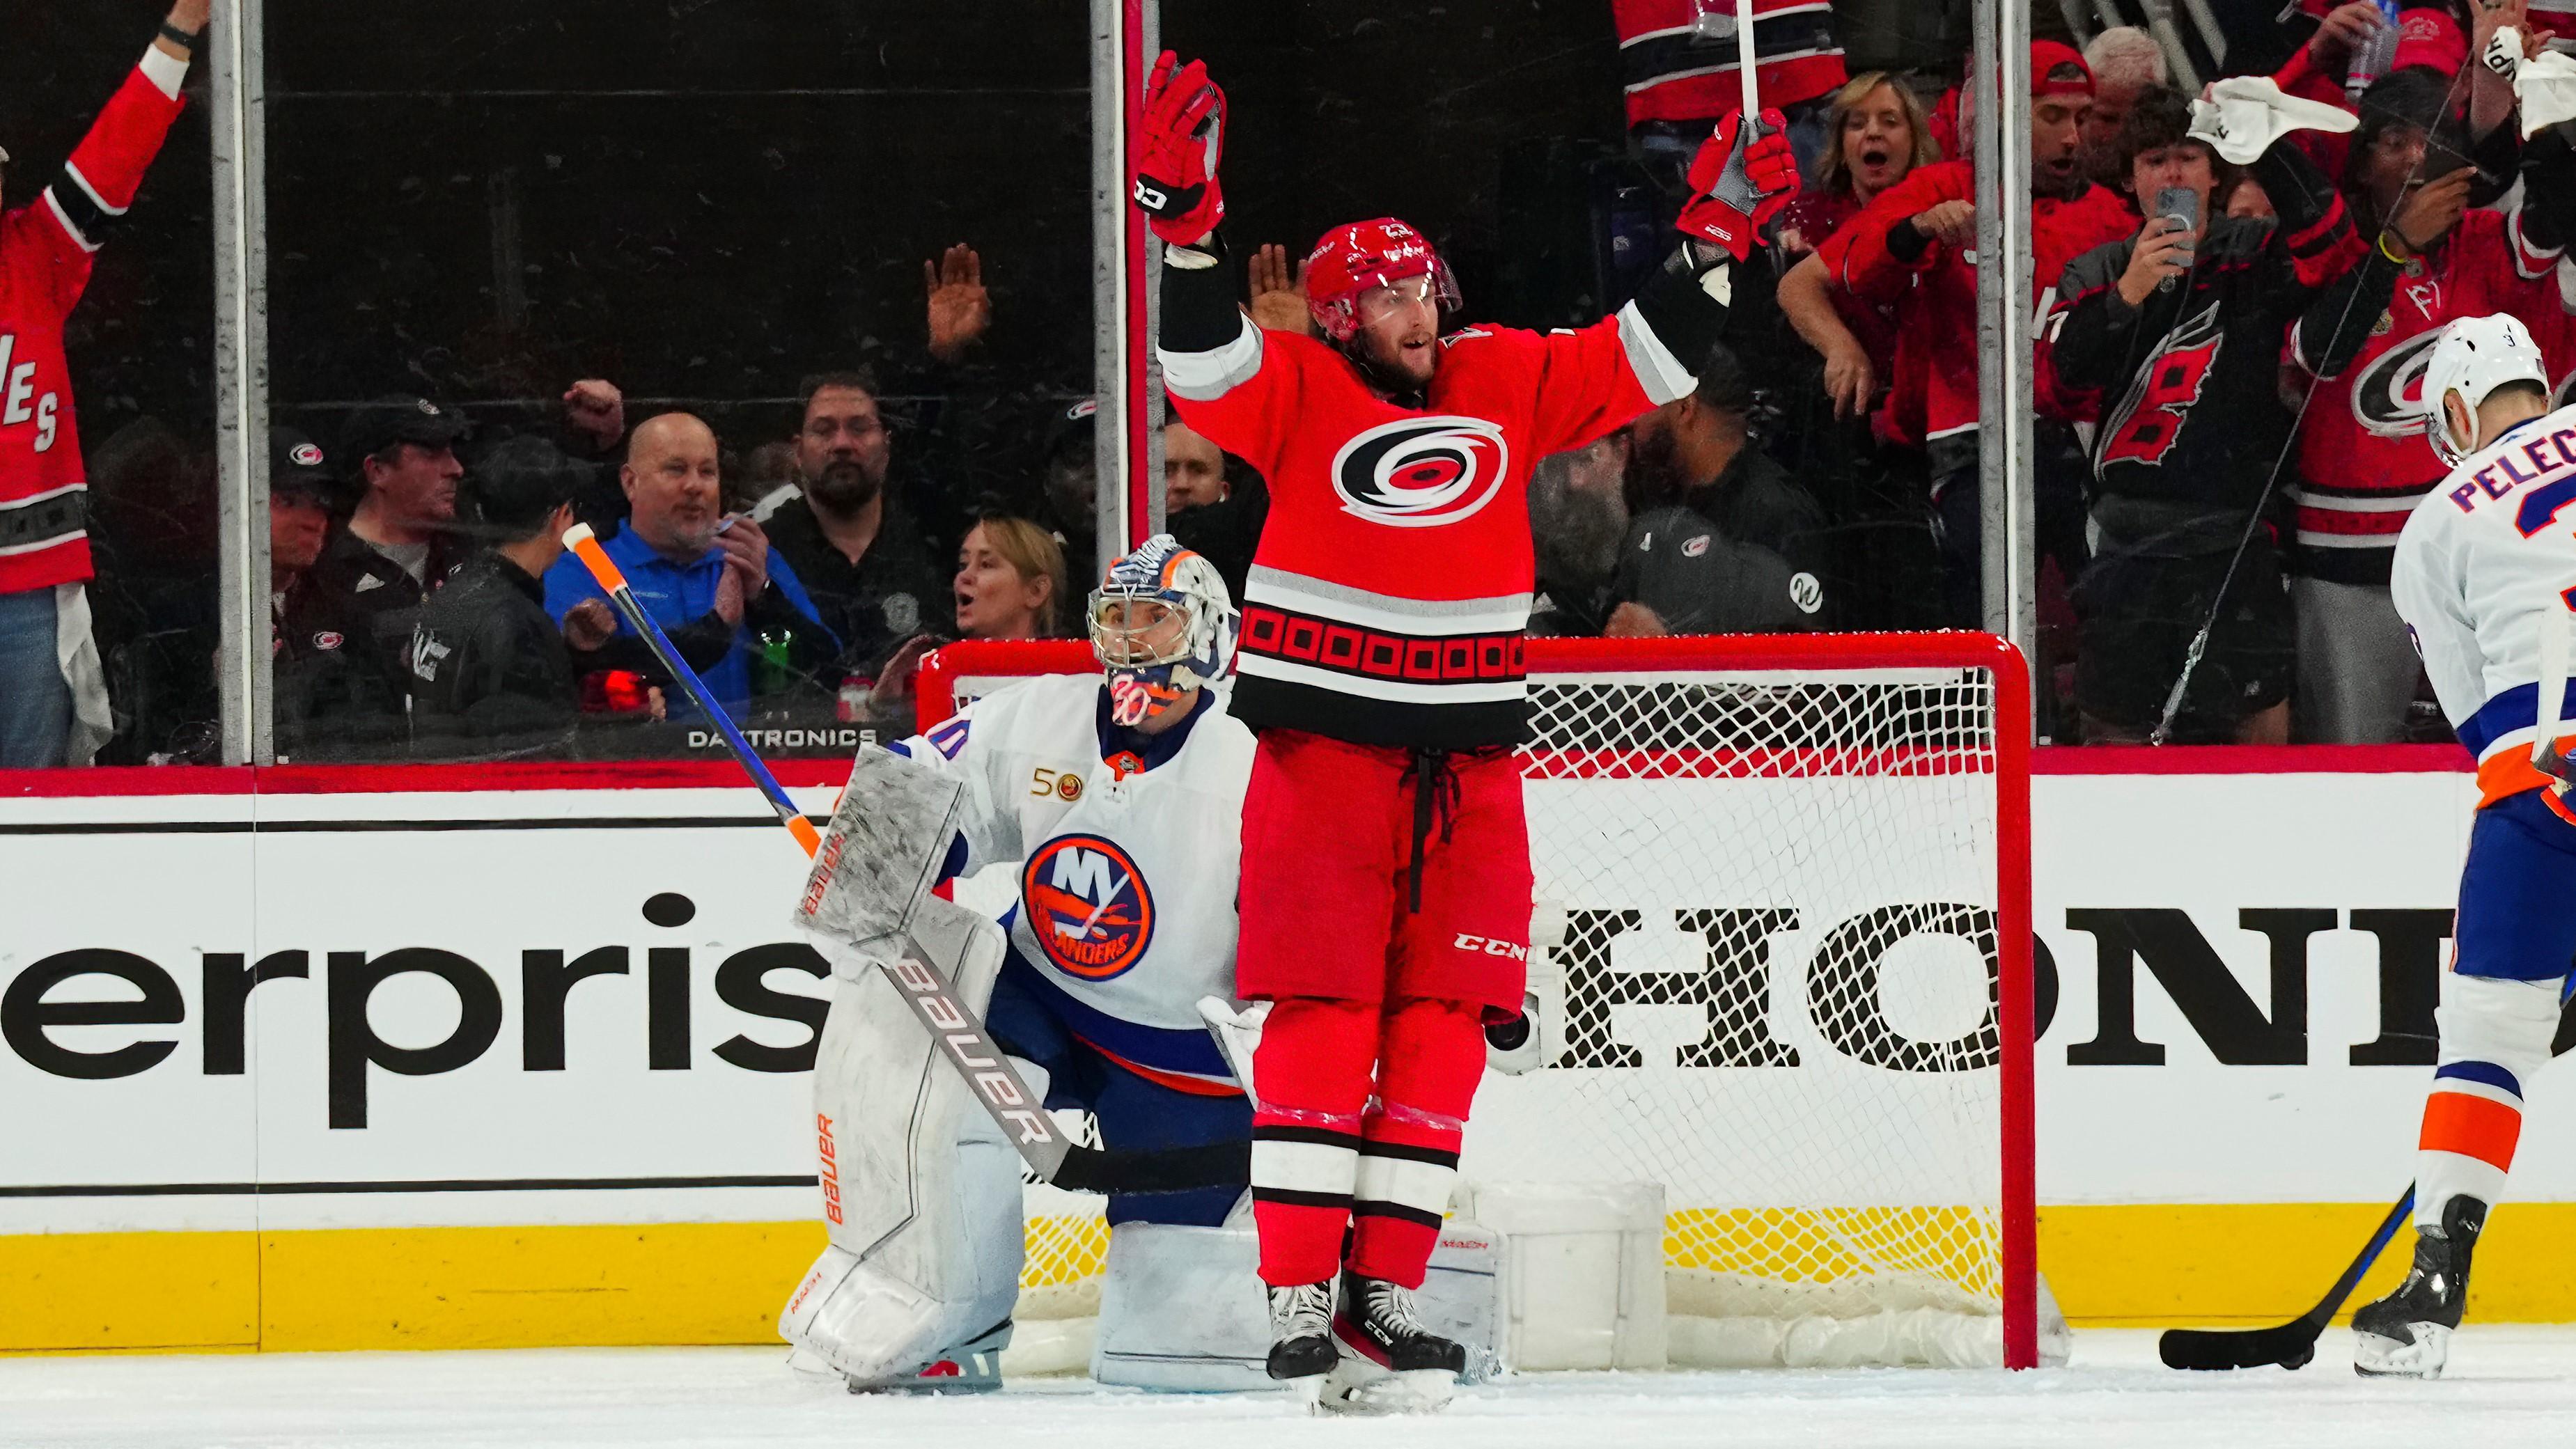 Apr 17, 2023; Raleigh, North Carolina, USA; Carolina Hurricanes right wing Stefan Noesen (23) reacts after scoring a goal past New York Islanders goaltender Ilya Sorokin (30) during the second period in game one of the first round of the 2023 Stanley Cup Playoffs at PNC Arena. Mandatory Credit: James Guillory-USA TODAY Sports / © James Guillory-USA TODAY Sports